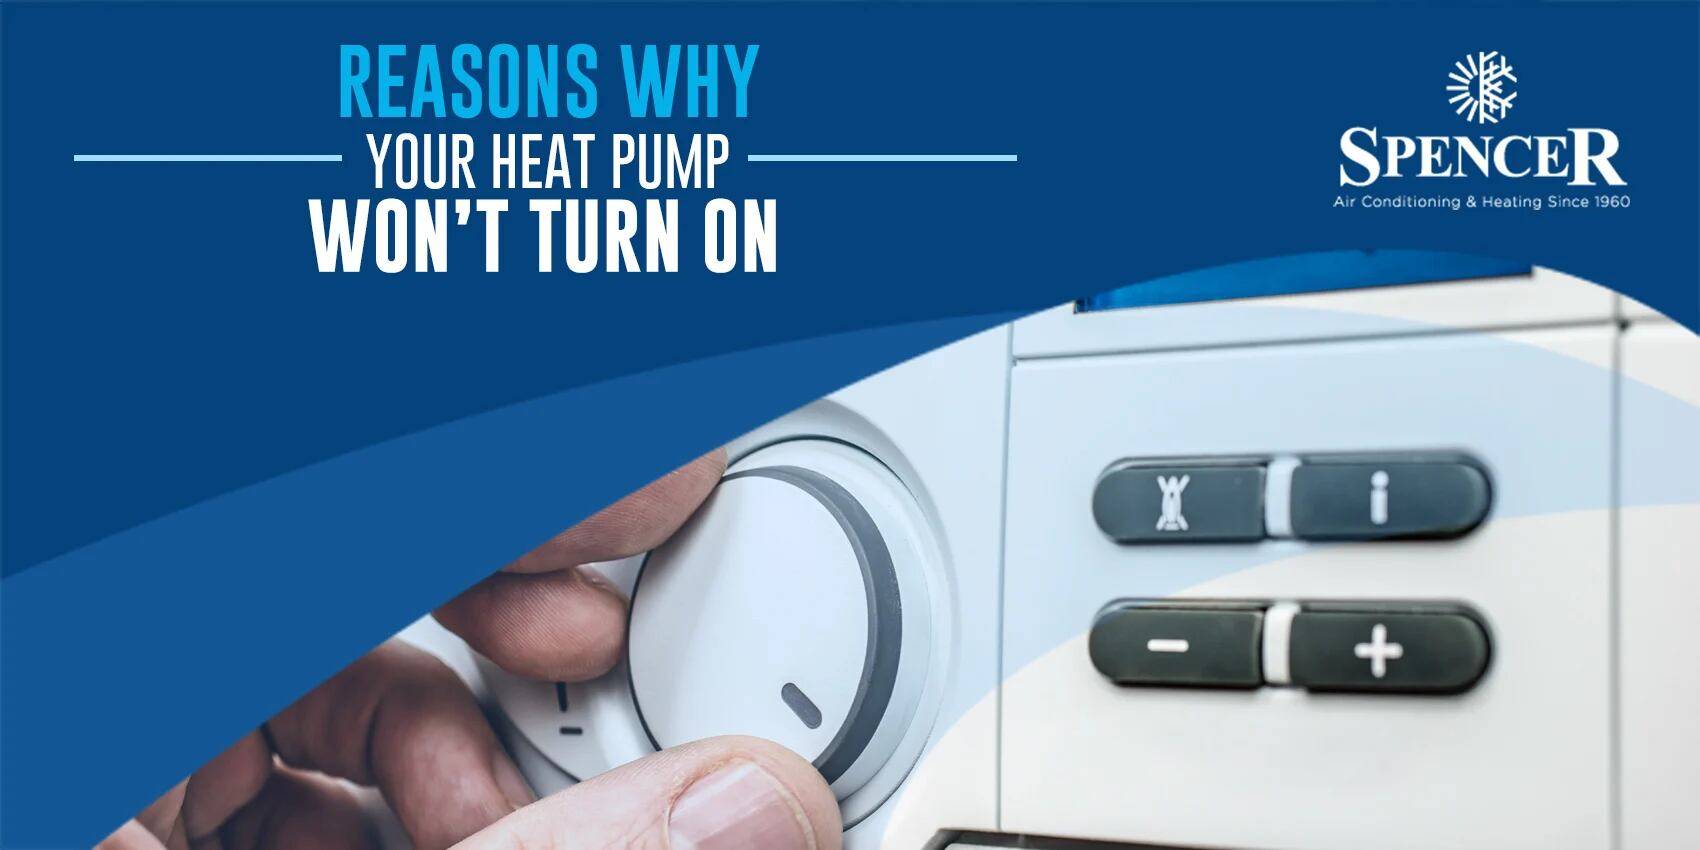 Reasons Why Your Heat Pump Won’t Turn On